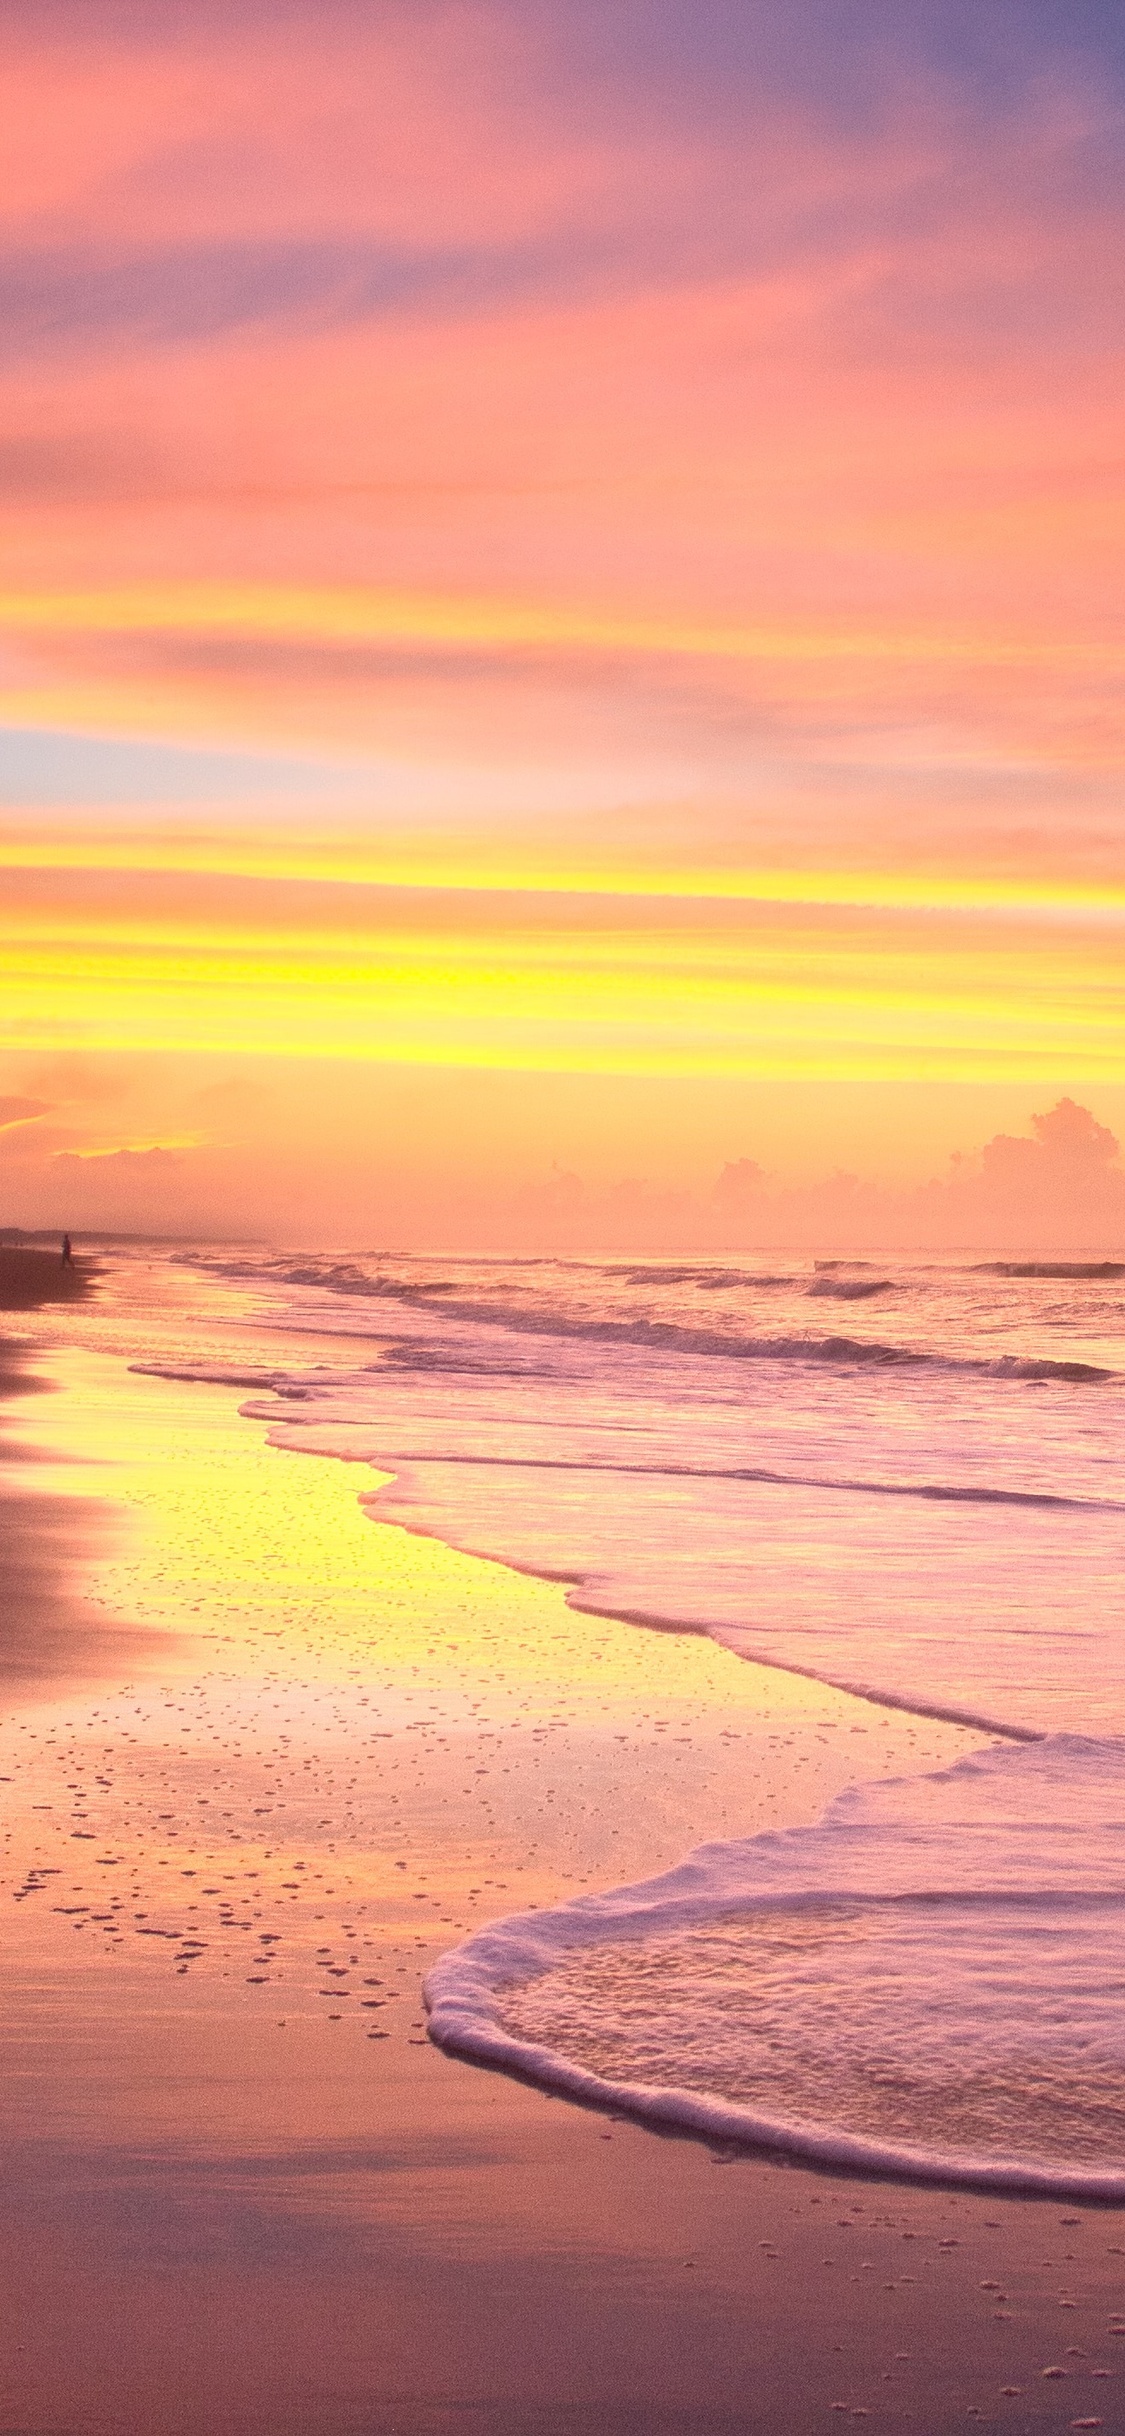 Sunrise On The Beach In The Summer Time At Ocean Isle Beach 4k iPhone XS, iPhone iPhone X HD 4k Wallpaper, Image, Background, Photo and Picture